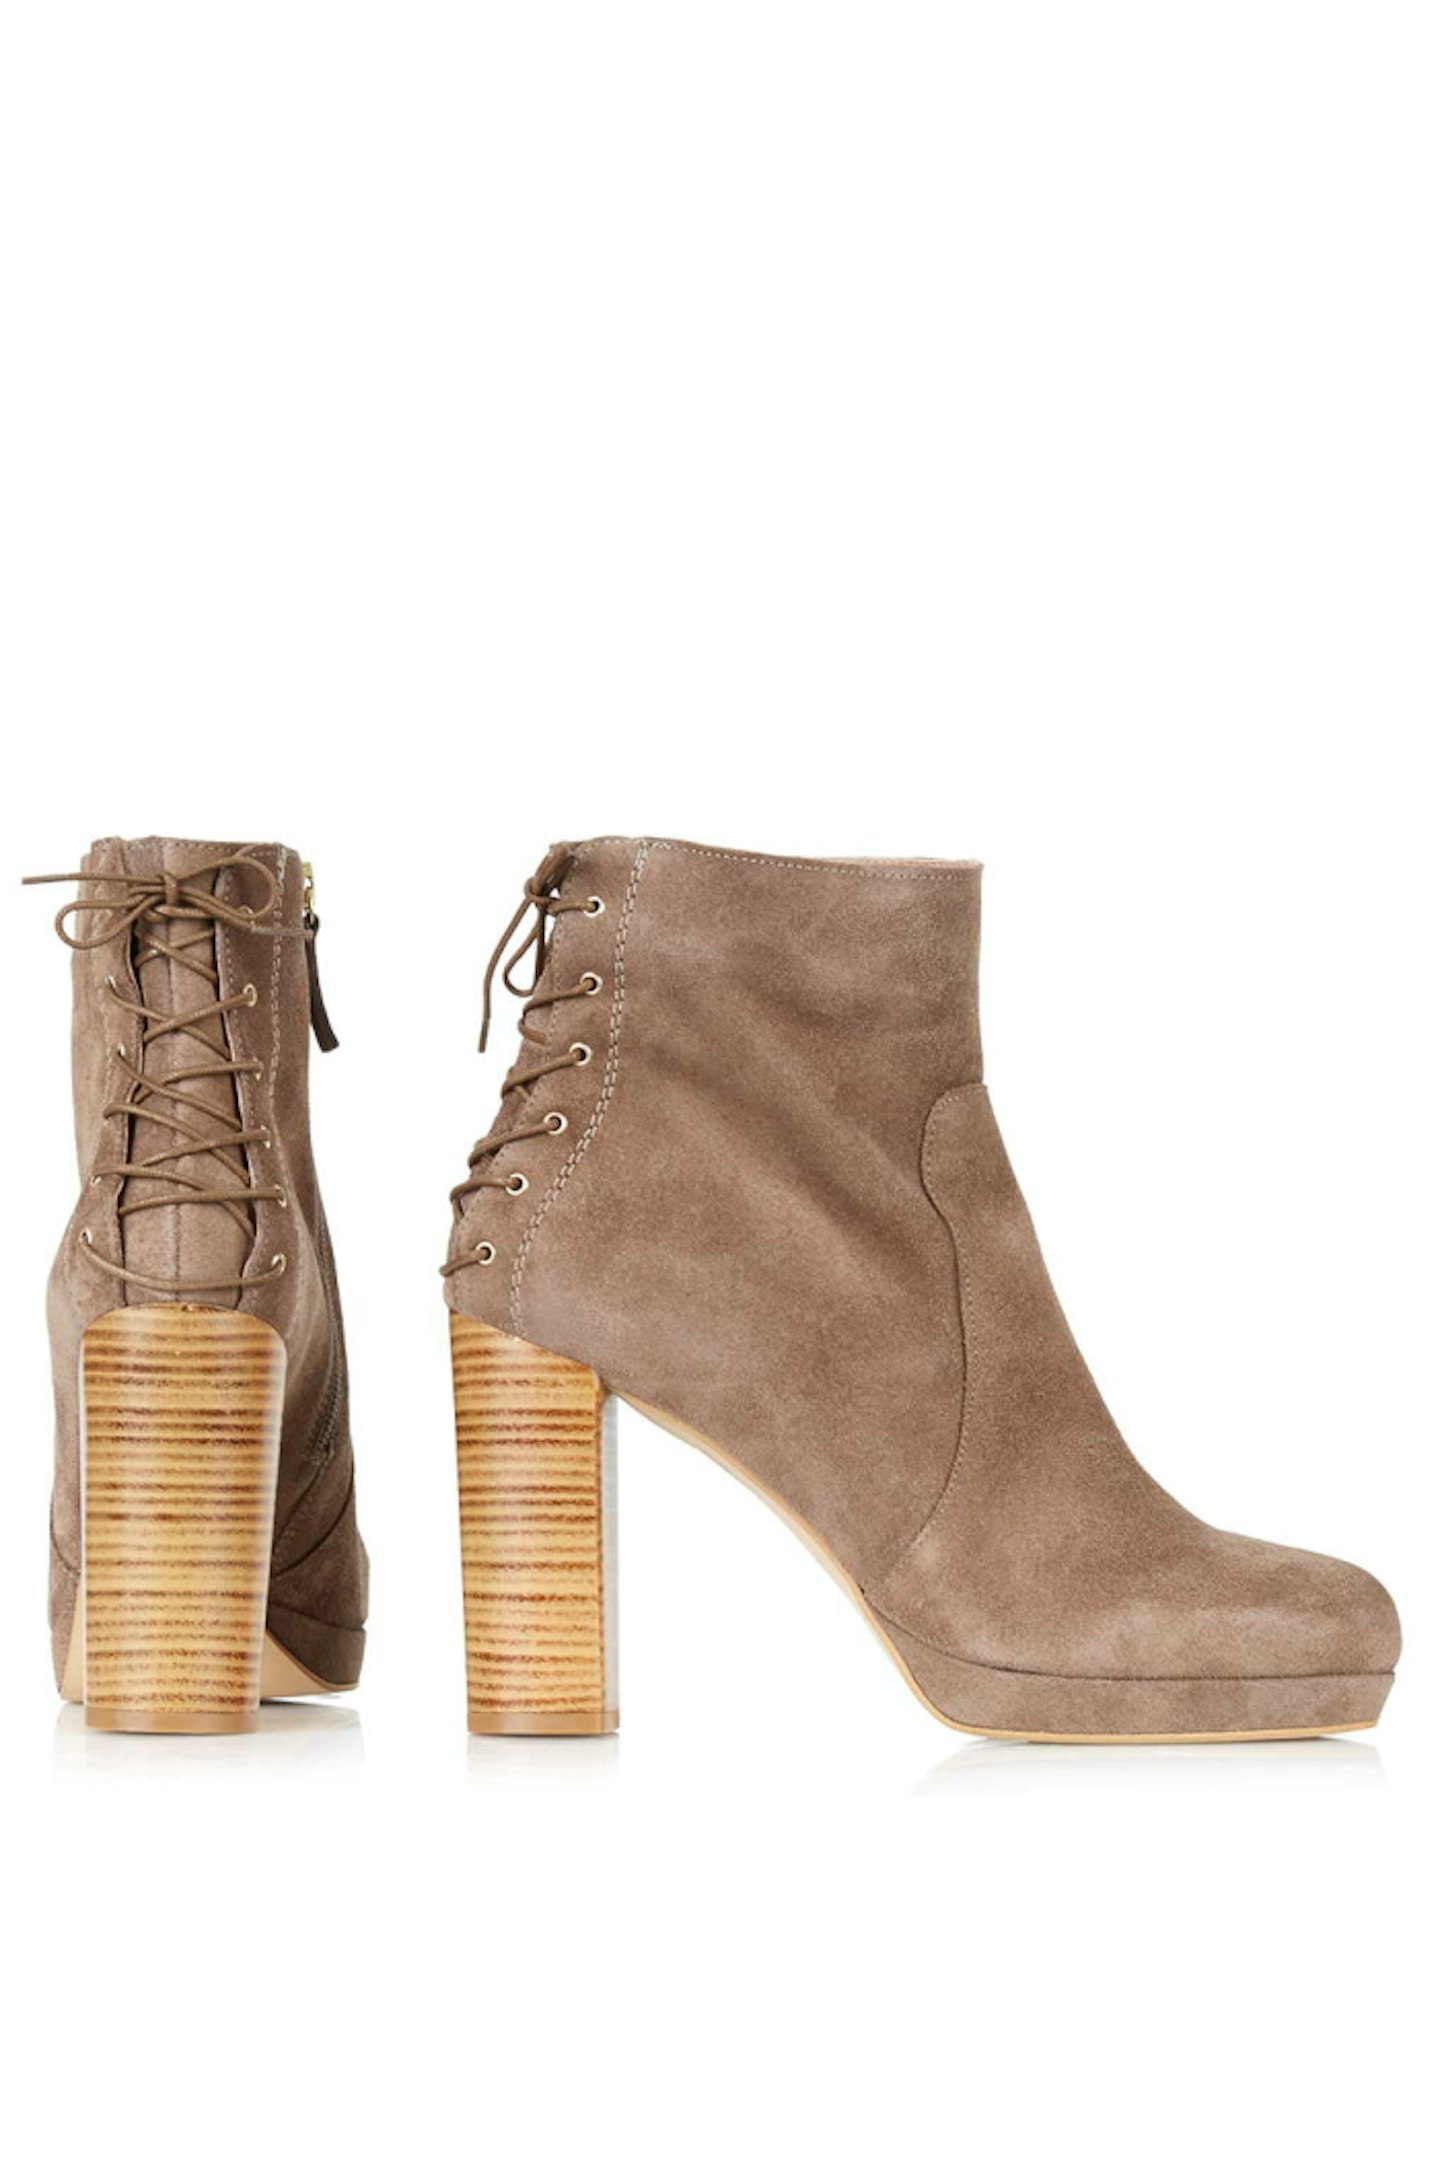 Topshop have some brilliant boots in at the moment. We have a real thing for these suede beige numbers.